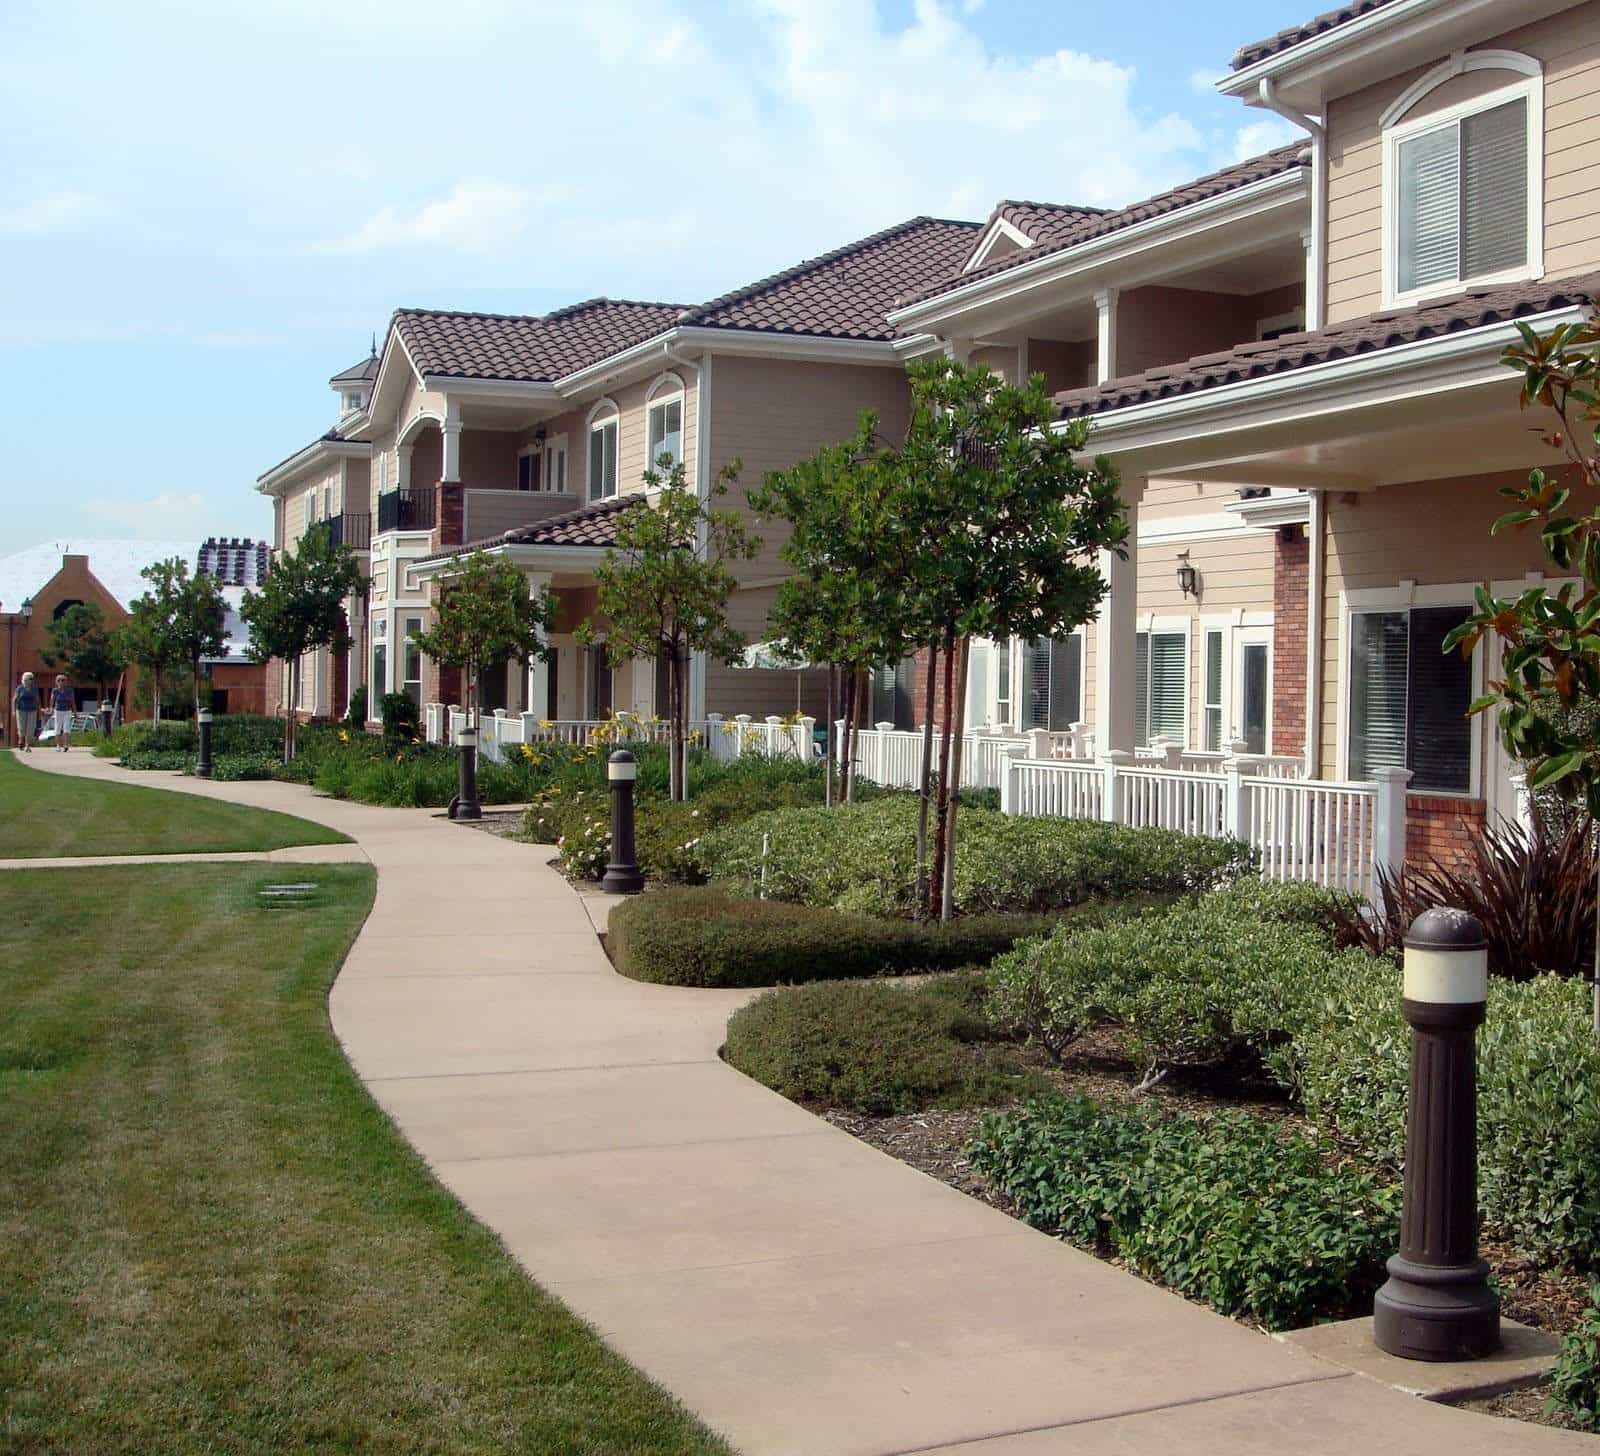 Meadowbrook Village Christian Retirement Community - The color of the sidewalk is Davis Colors' Meadowbrook Brown (custom color).